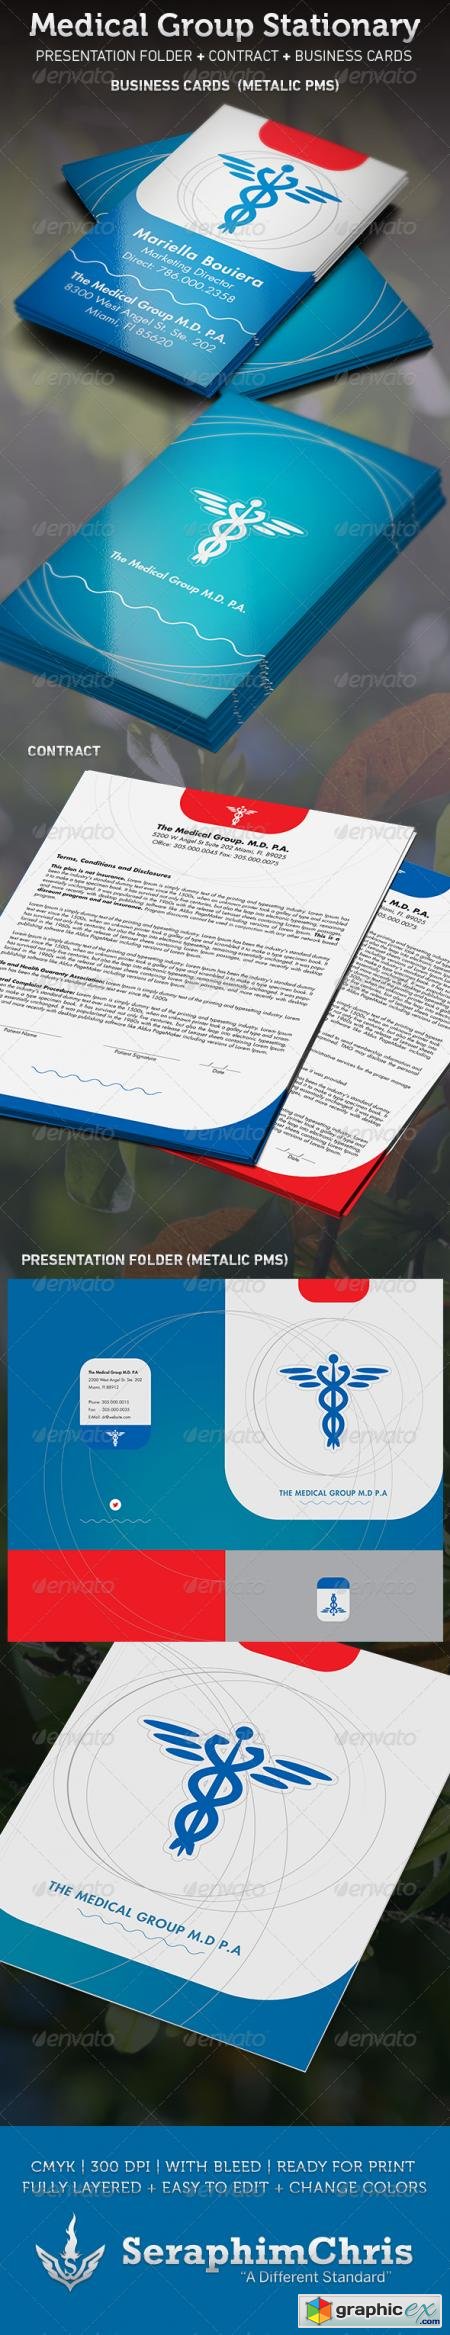 Medical Group Stationary Template